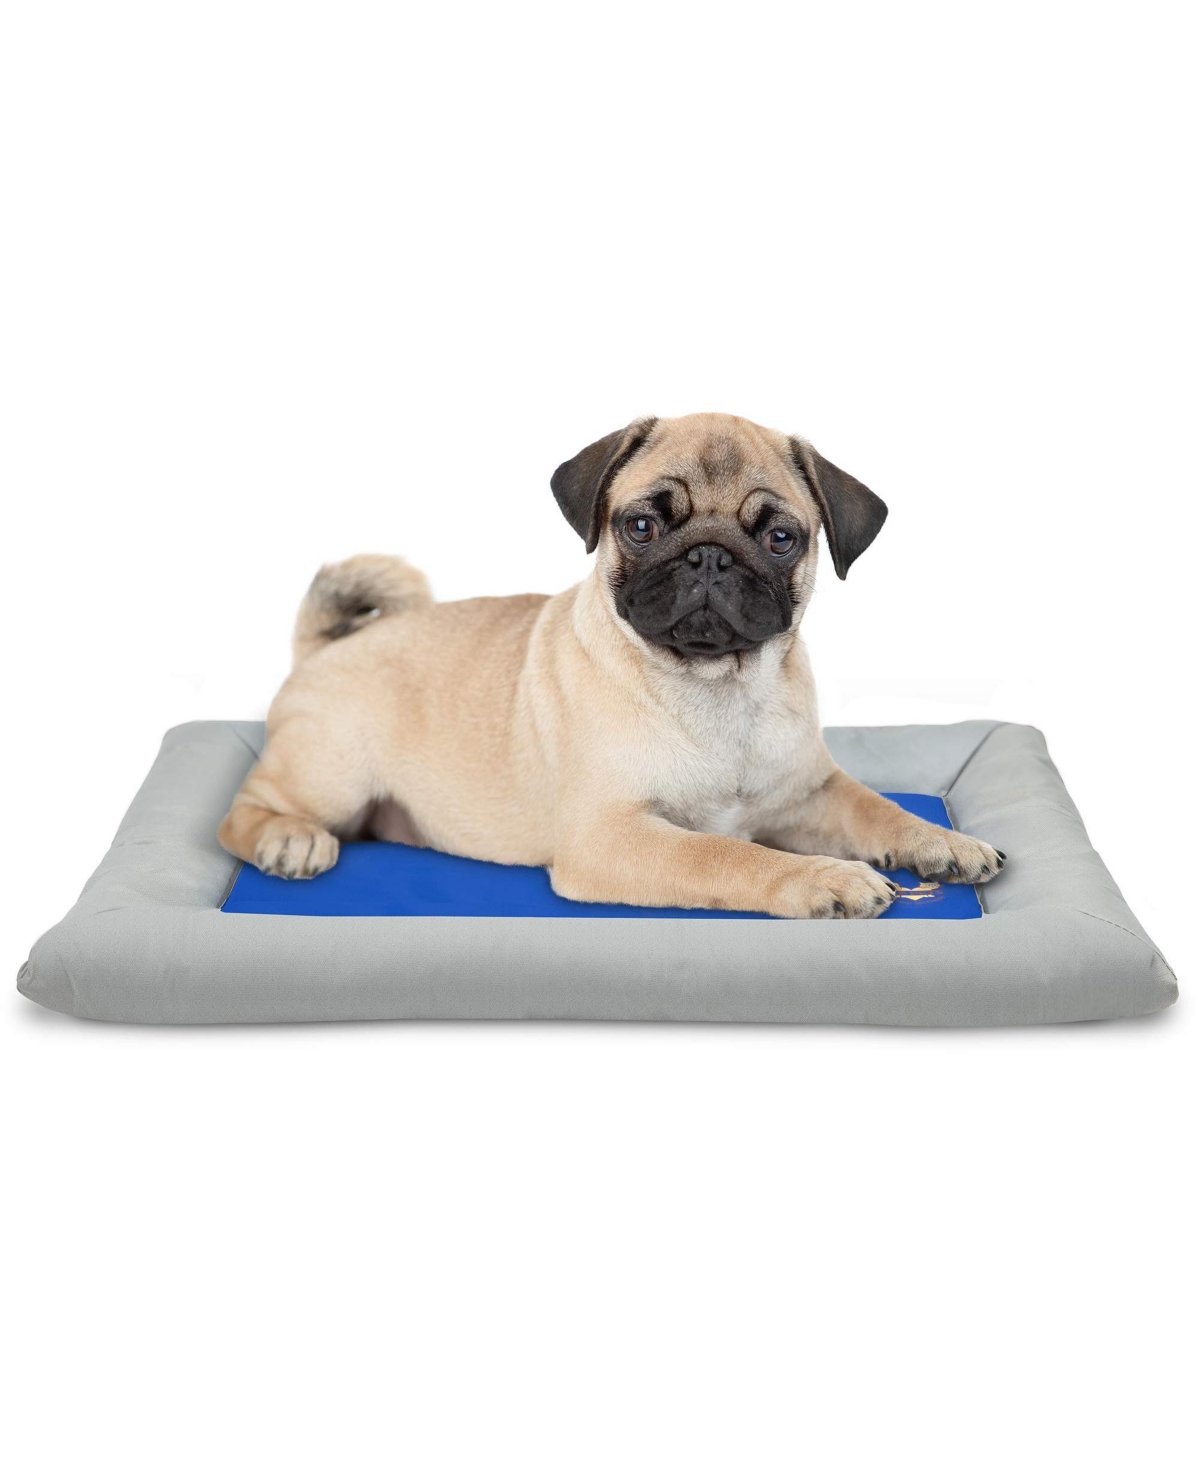 Self Cooling Pet Bed, Gel-based Portable Dog Mat, Small - Blue